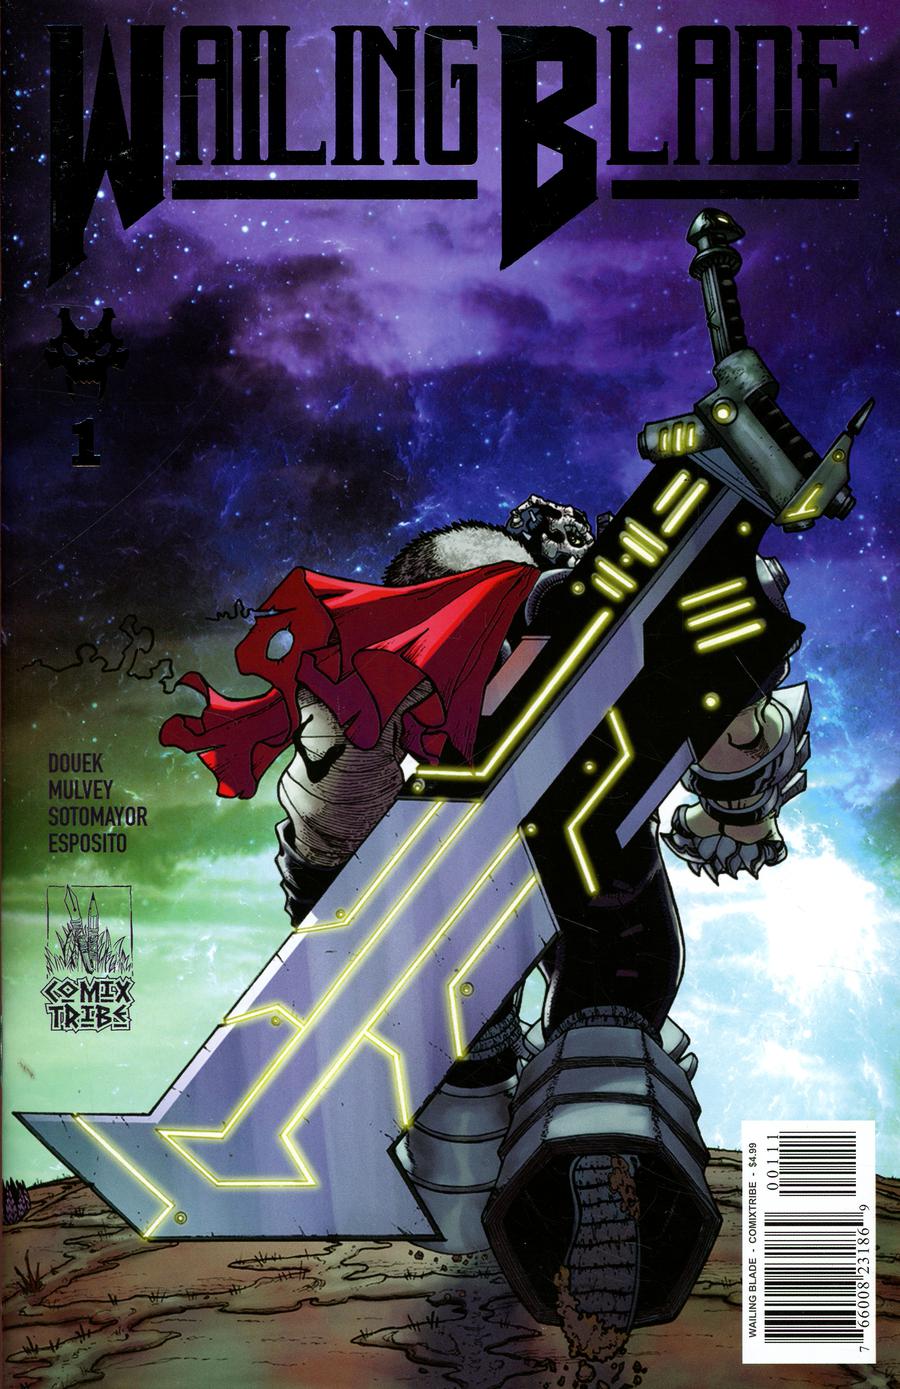 Wailing Blade #1 Cover A Night Silver Foil